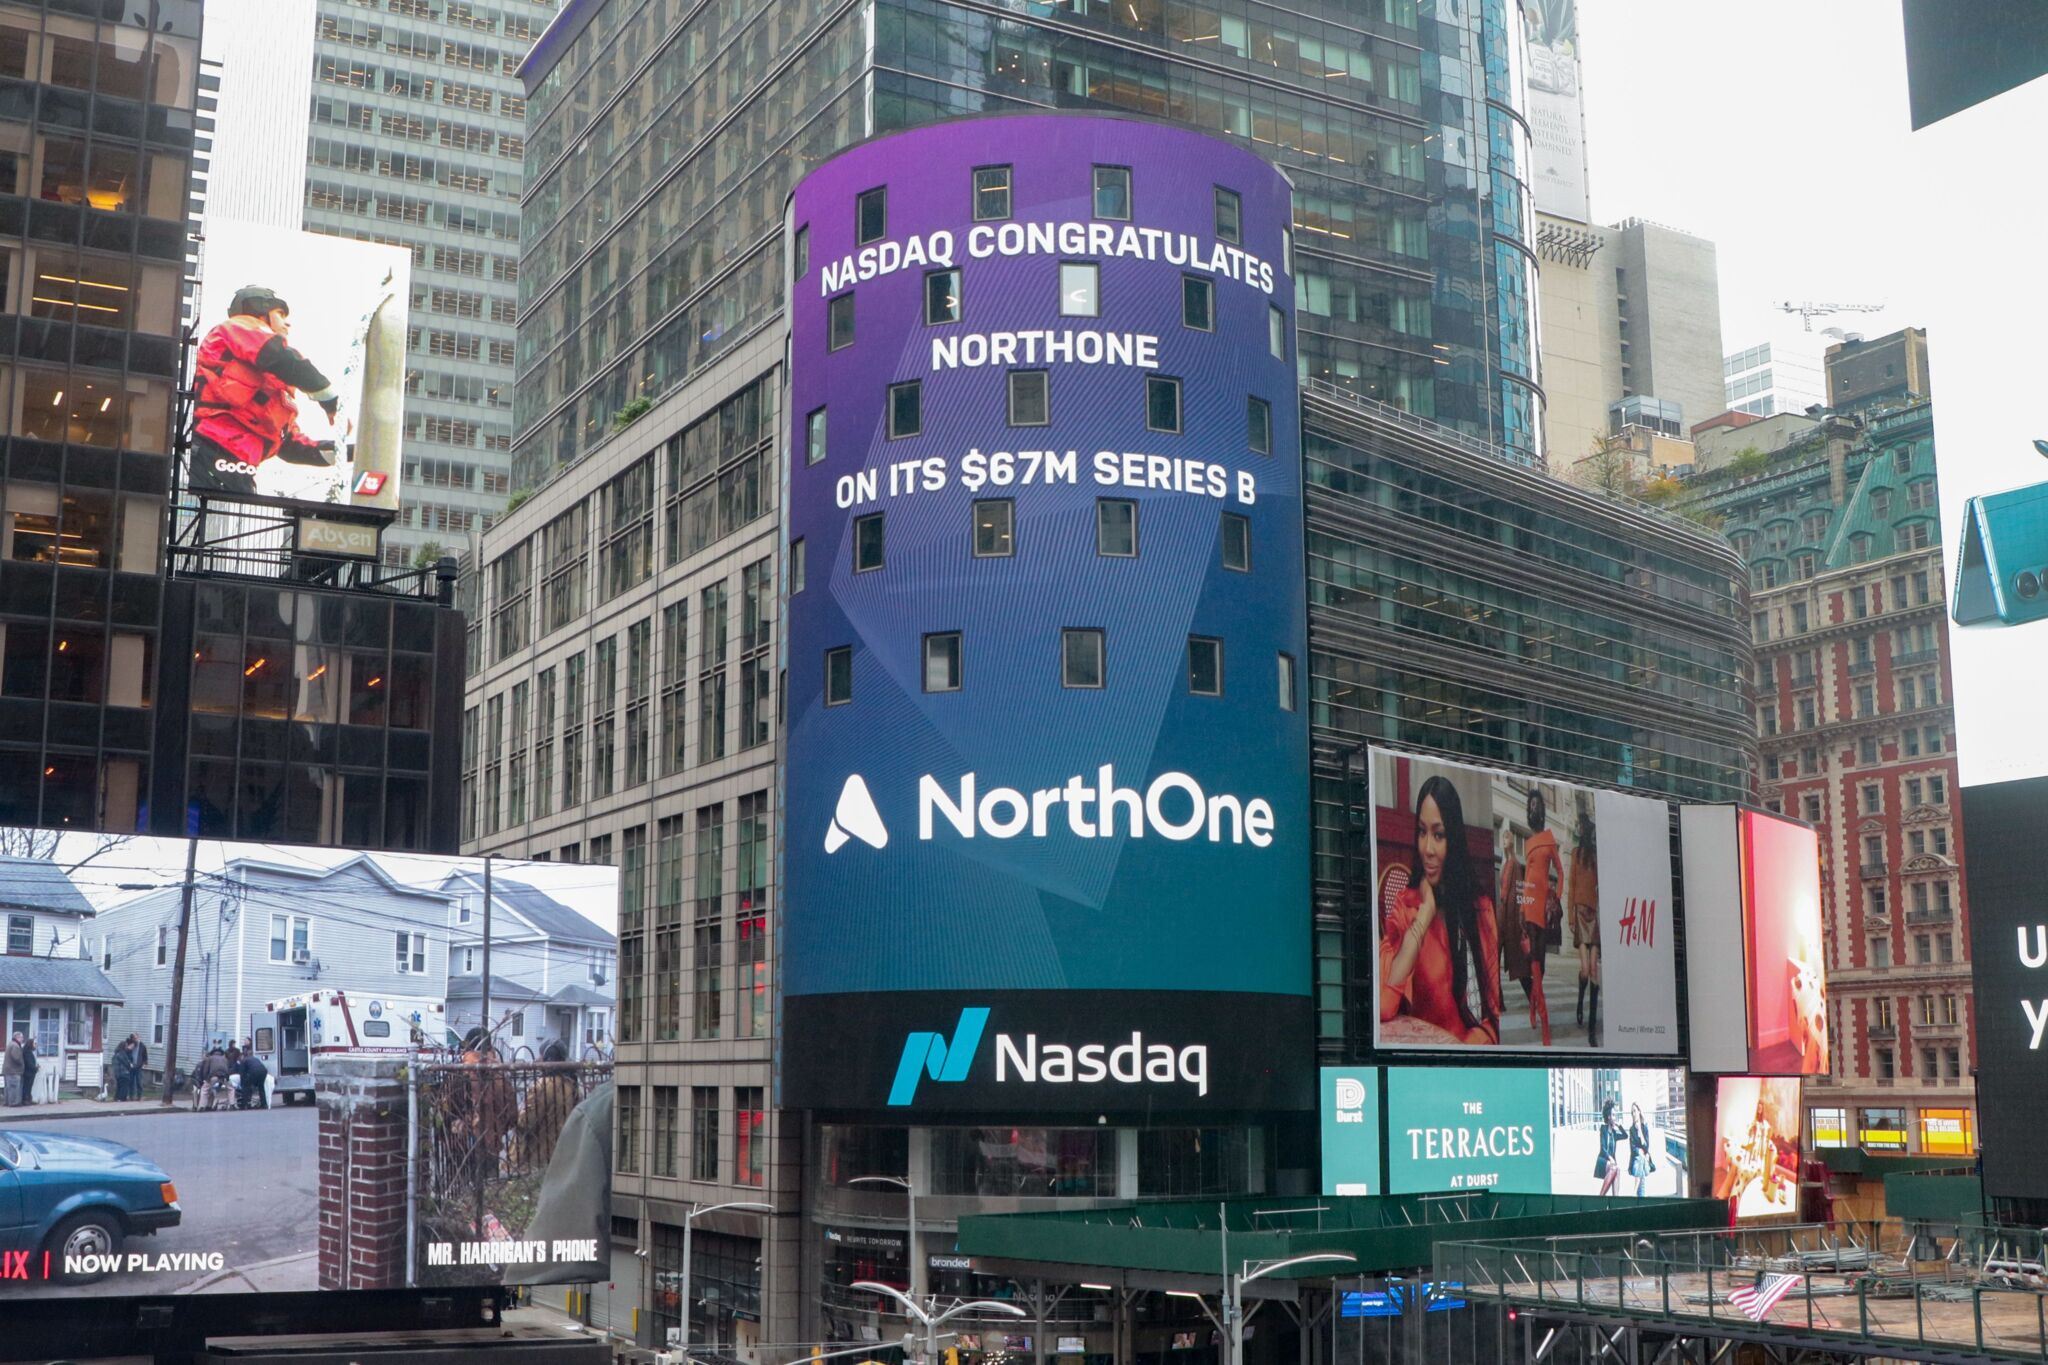 NorthOne funding announcement in Time Square on the Nasdaq sign